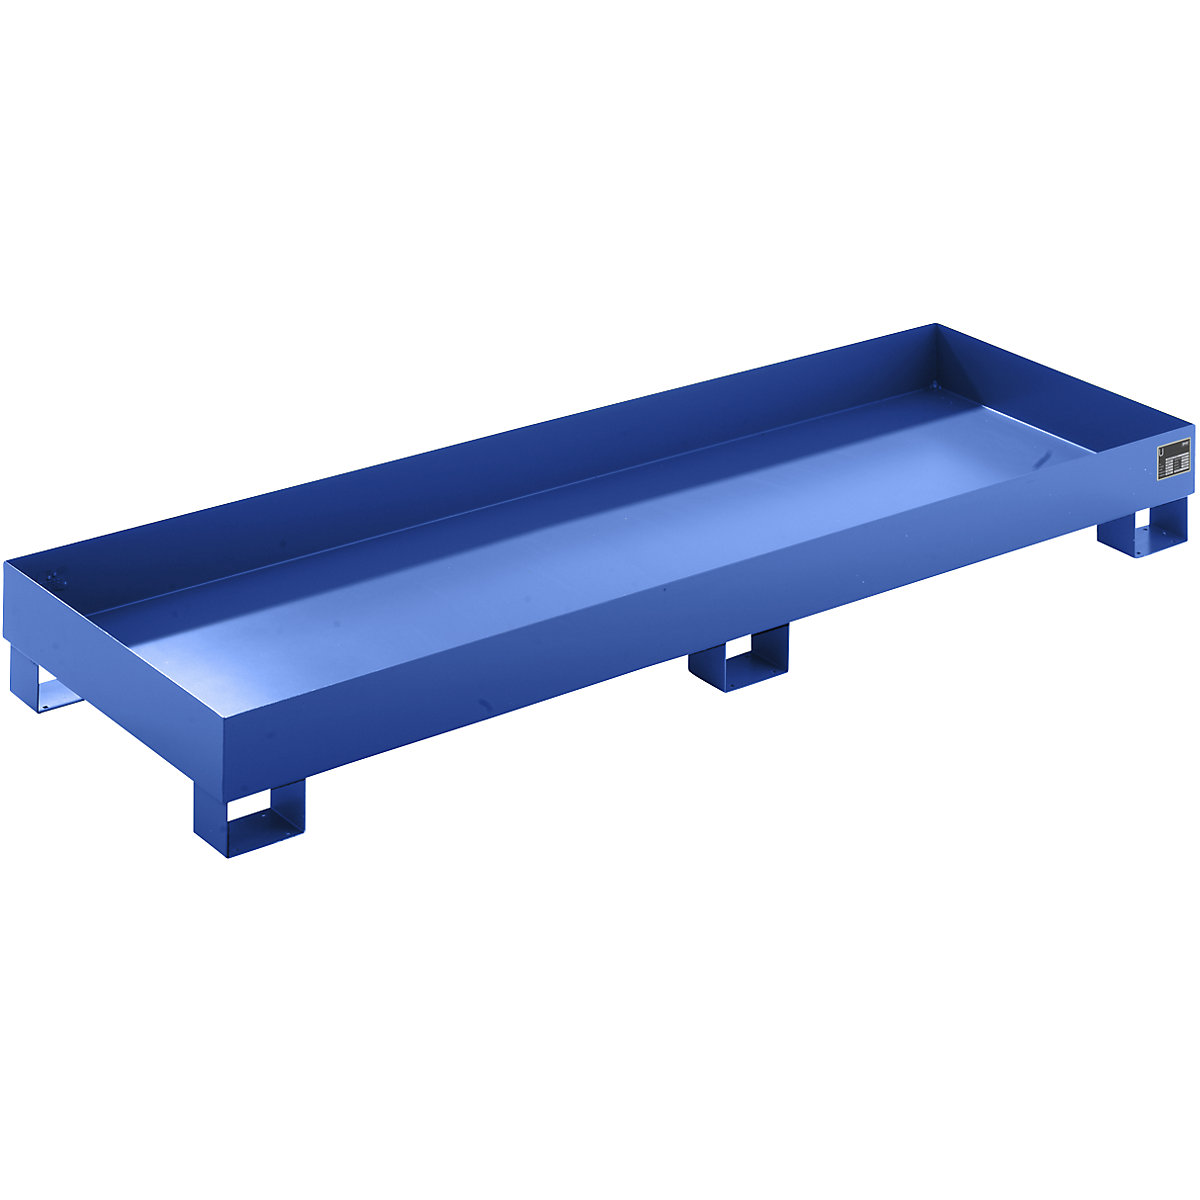 EUROKRAFTbasic – Sump tray made from sheet steel, LxWxH 2400 x 800 x 250 mm, blue RAL 5012